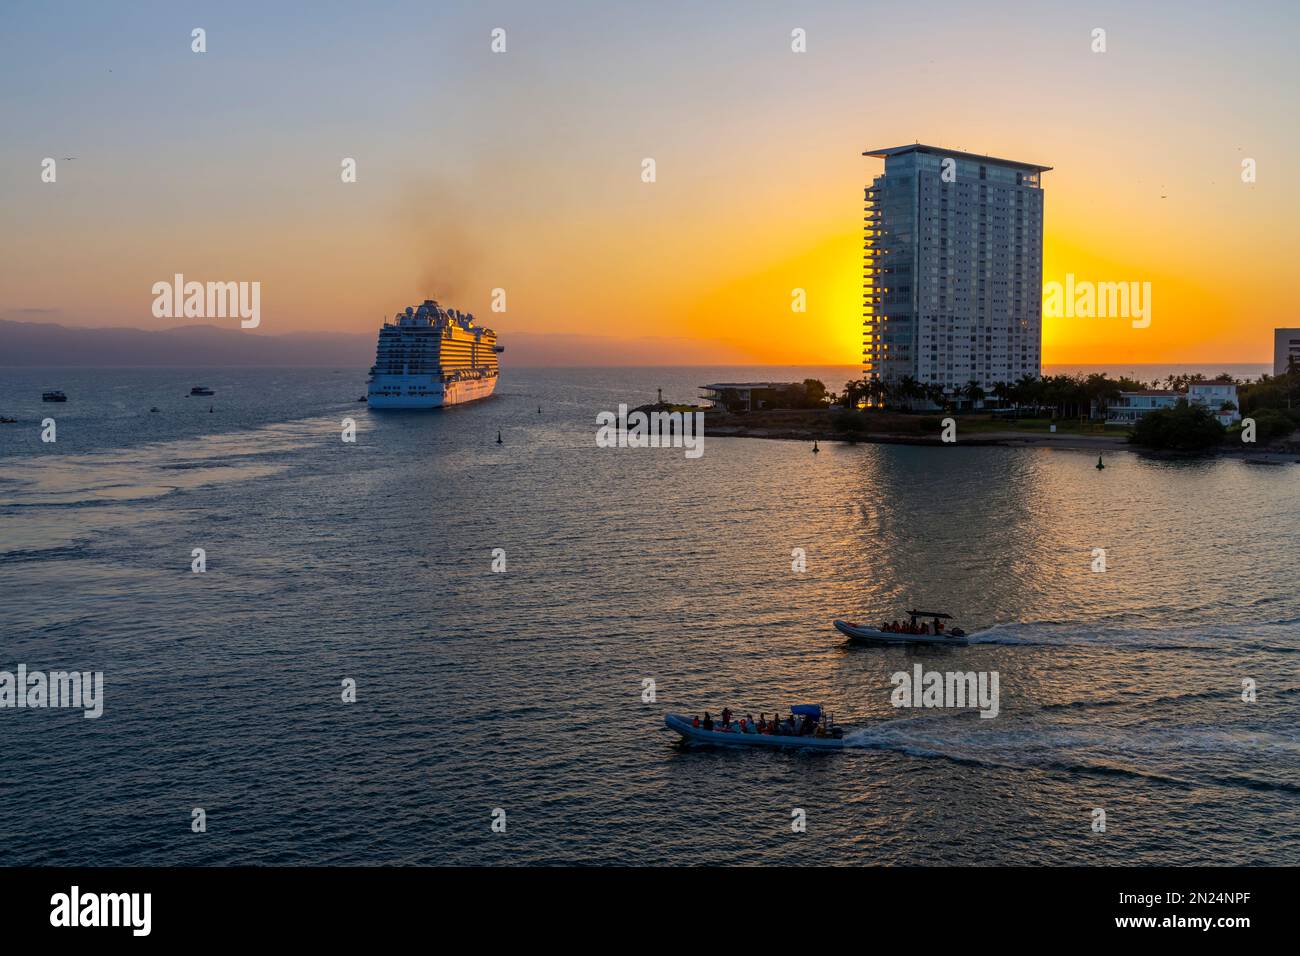 A large cruise ship heads out at sunset from the port of Puerto Vallarta, Mexico. Stock Photo